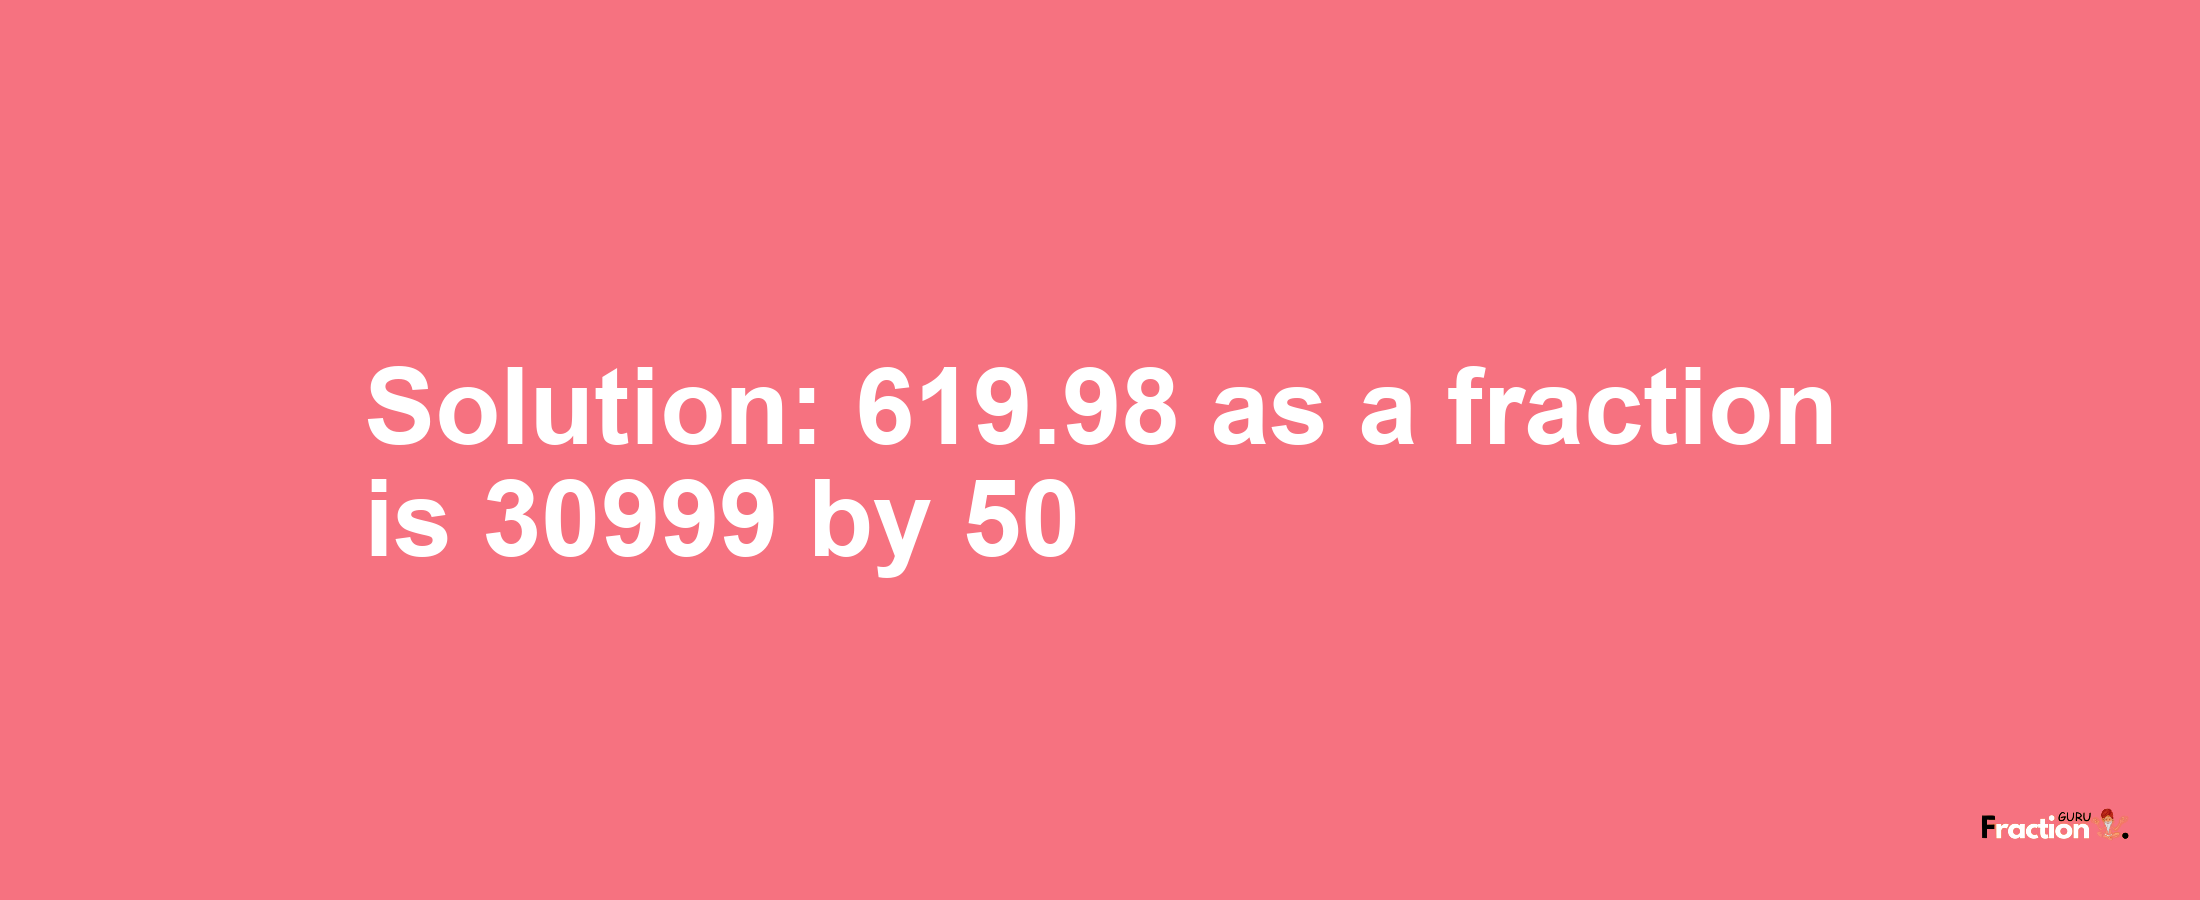 Solution:619.98 as a fraction is 30999/50